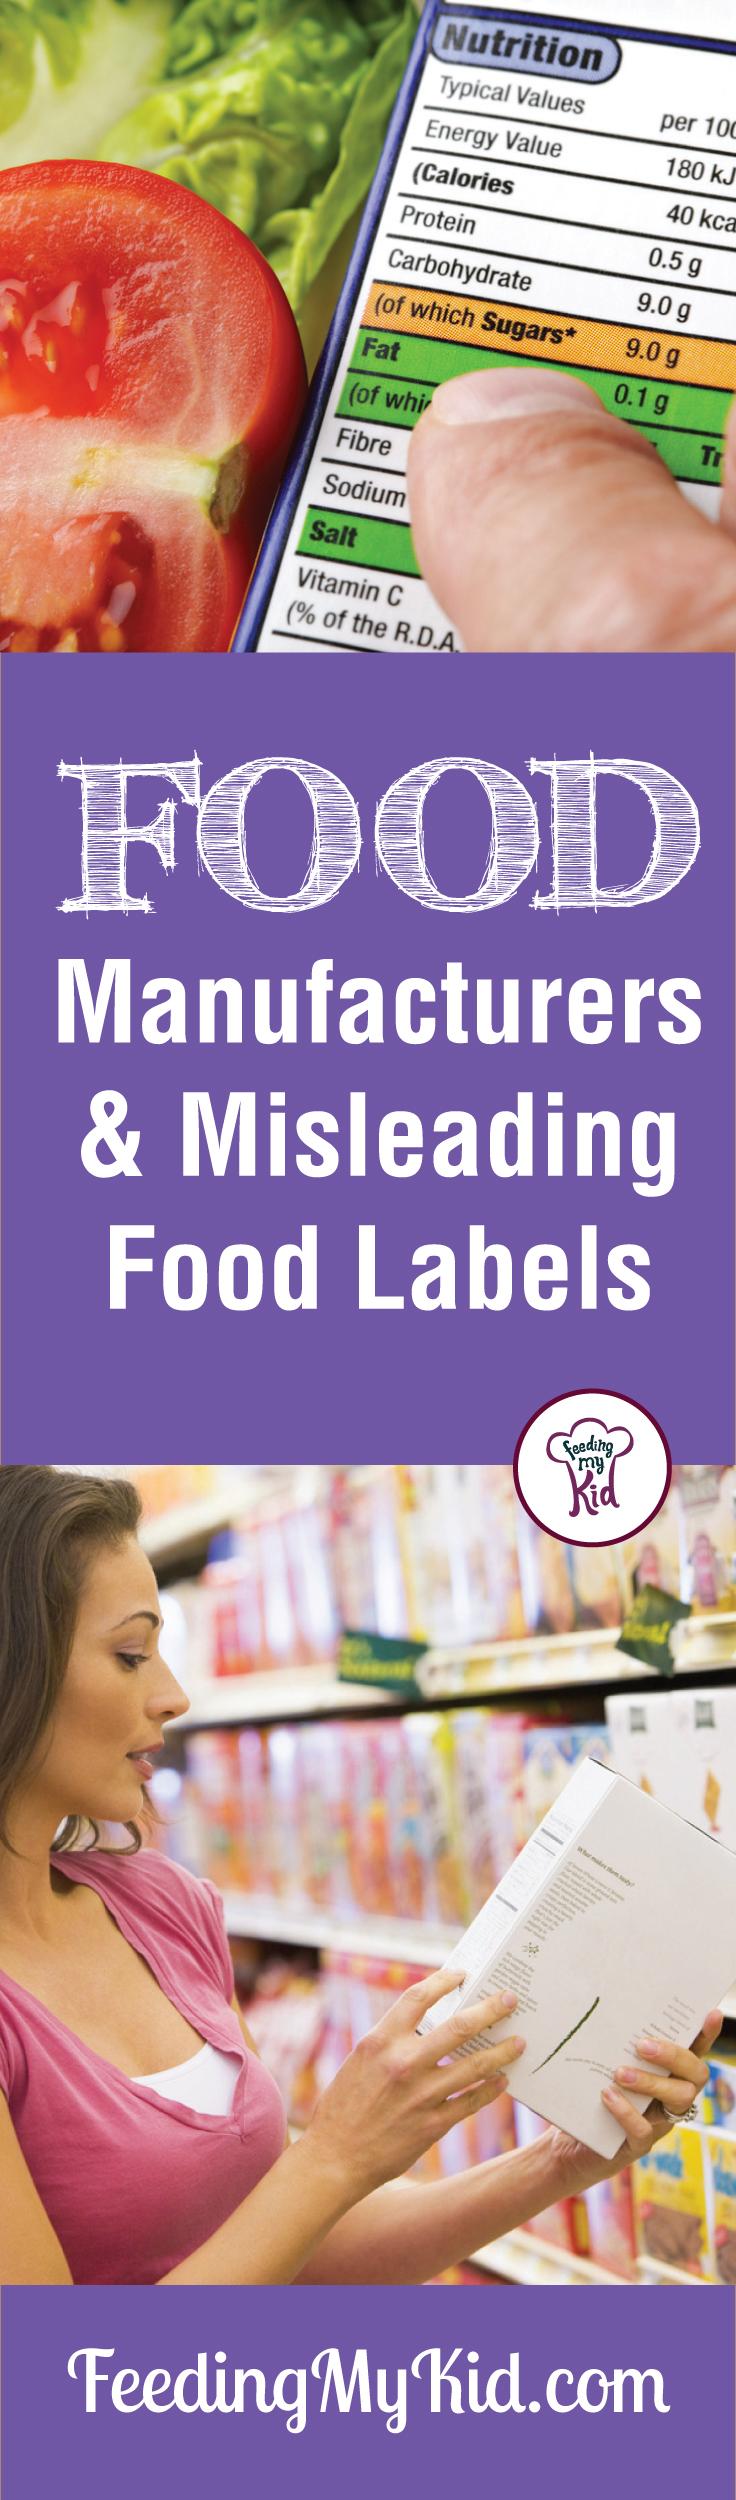 Why you should always pay attention to the food you eat. Reading food labels is the first step. Learn the truth about misleading food labels.